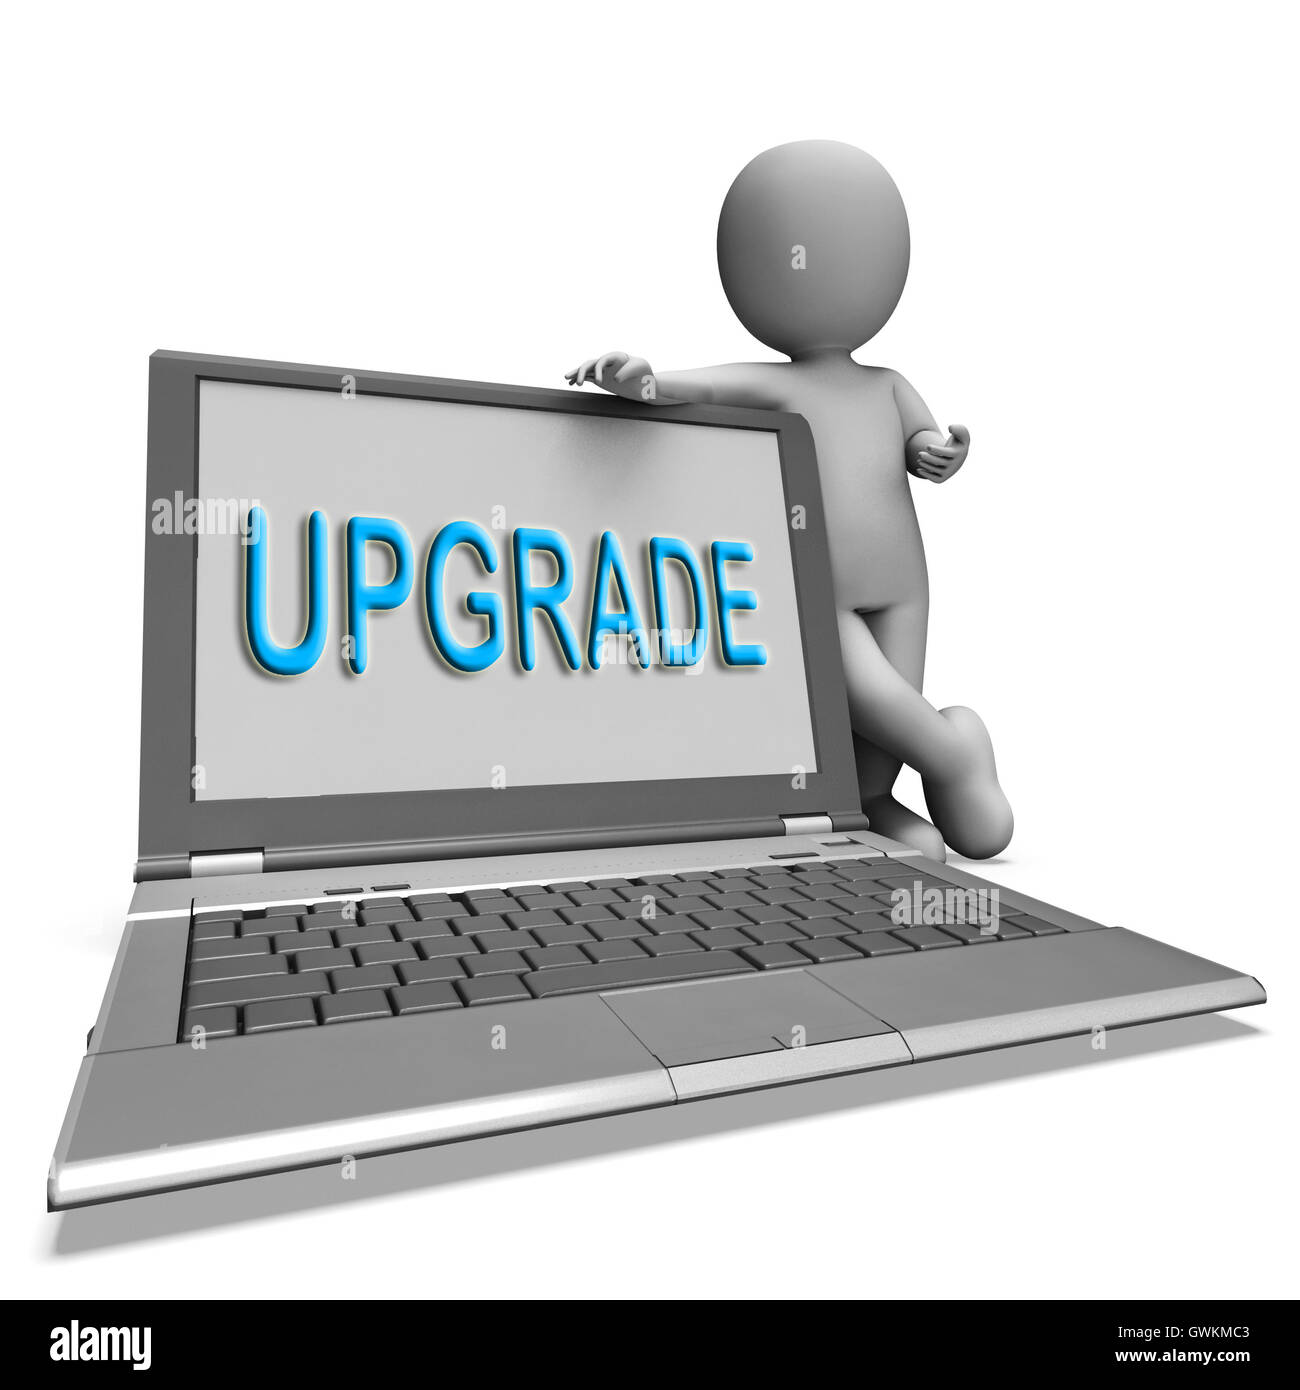 Upgrade Laptop Means Improve Upgrading Or Updating Stock Photo